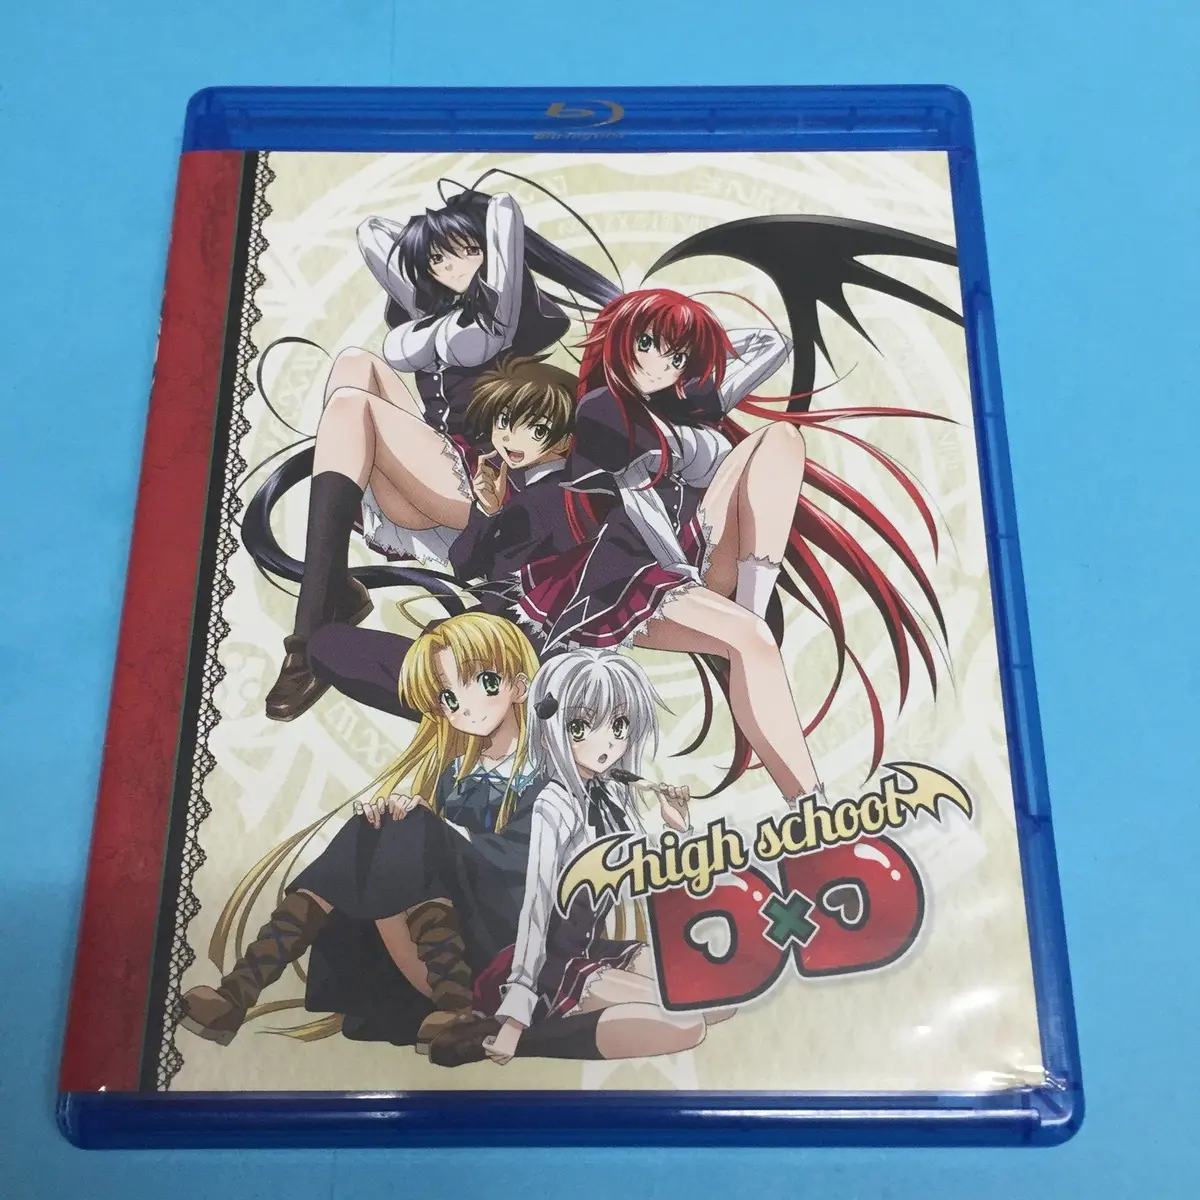 damien coyle recommends highschool dxd eng sub pic